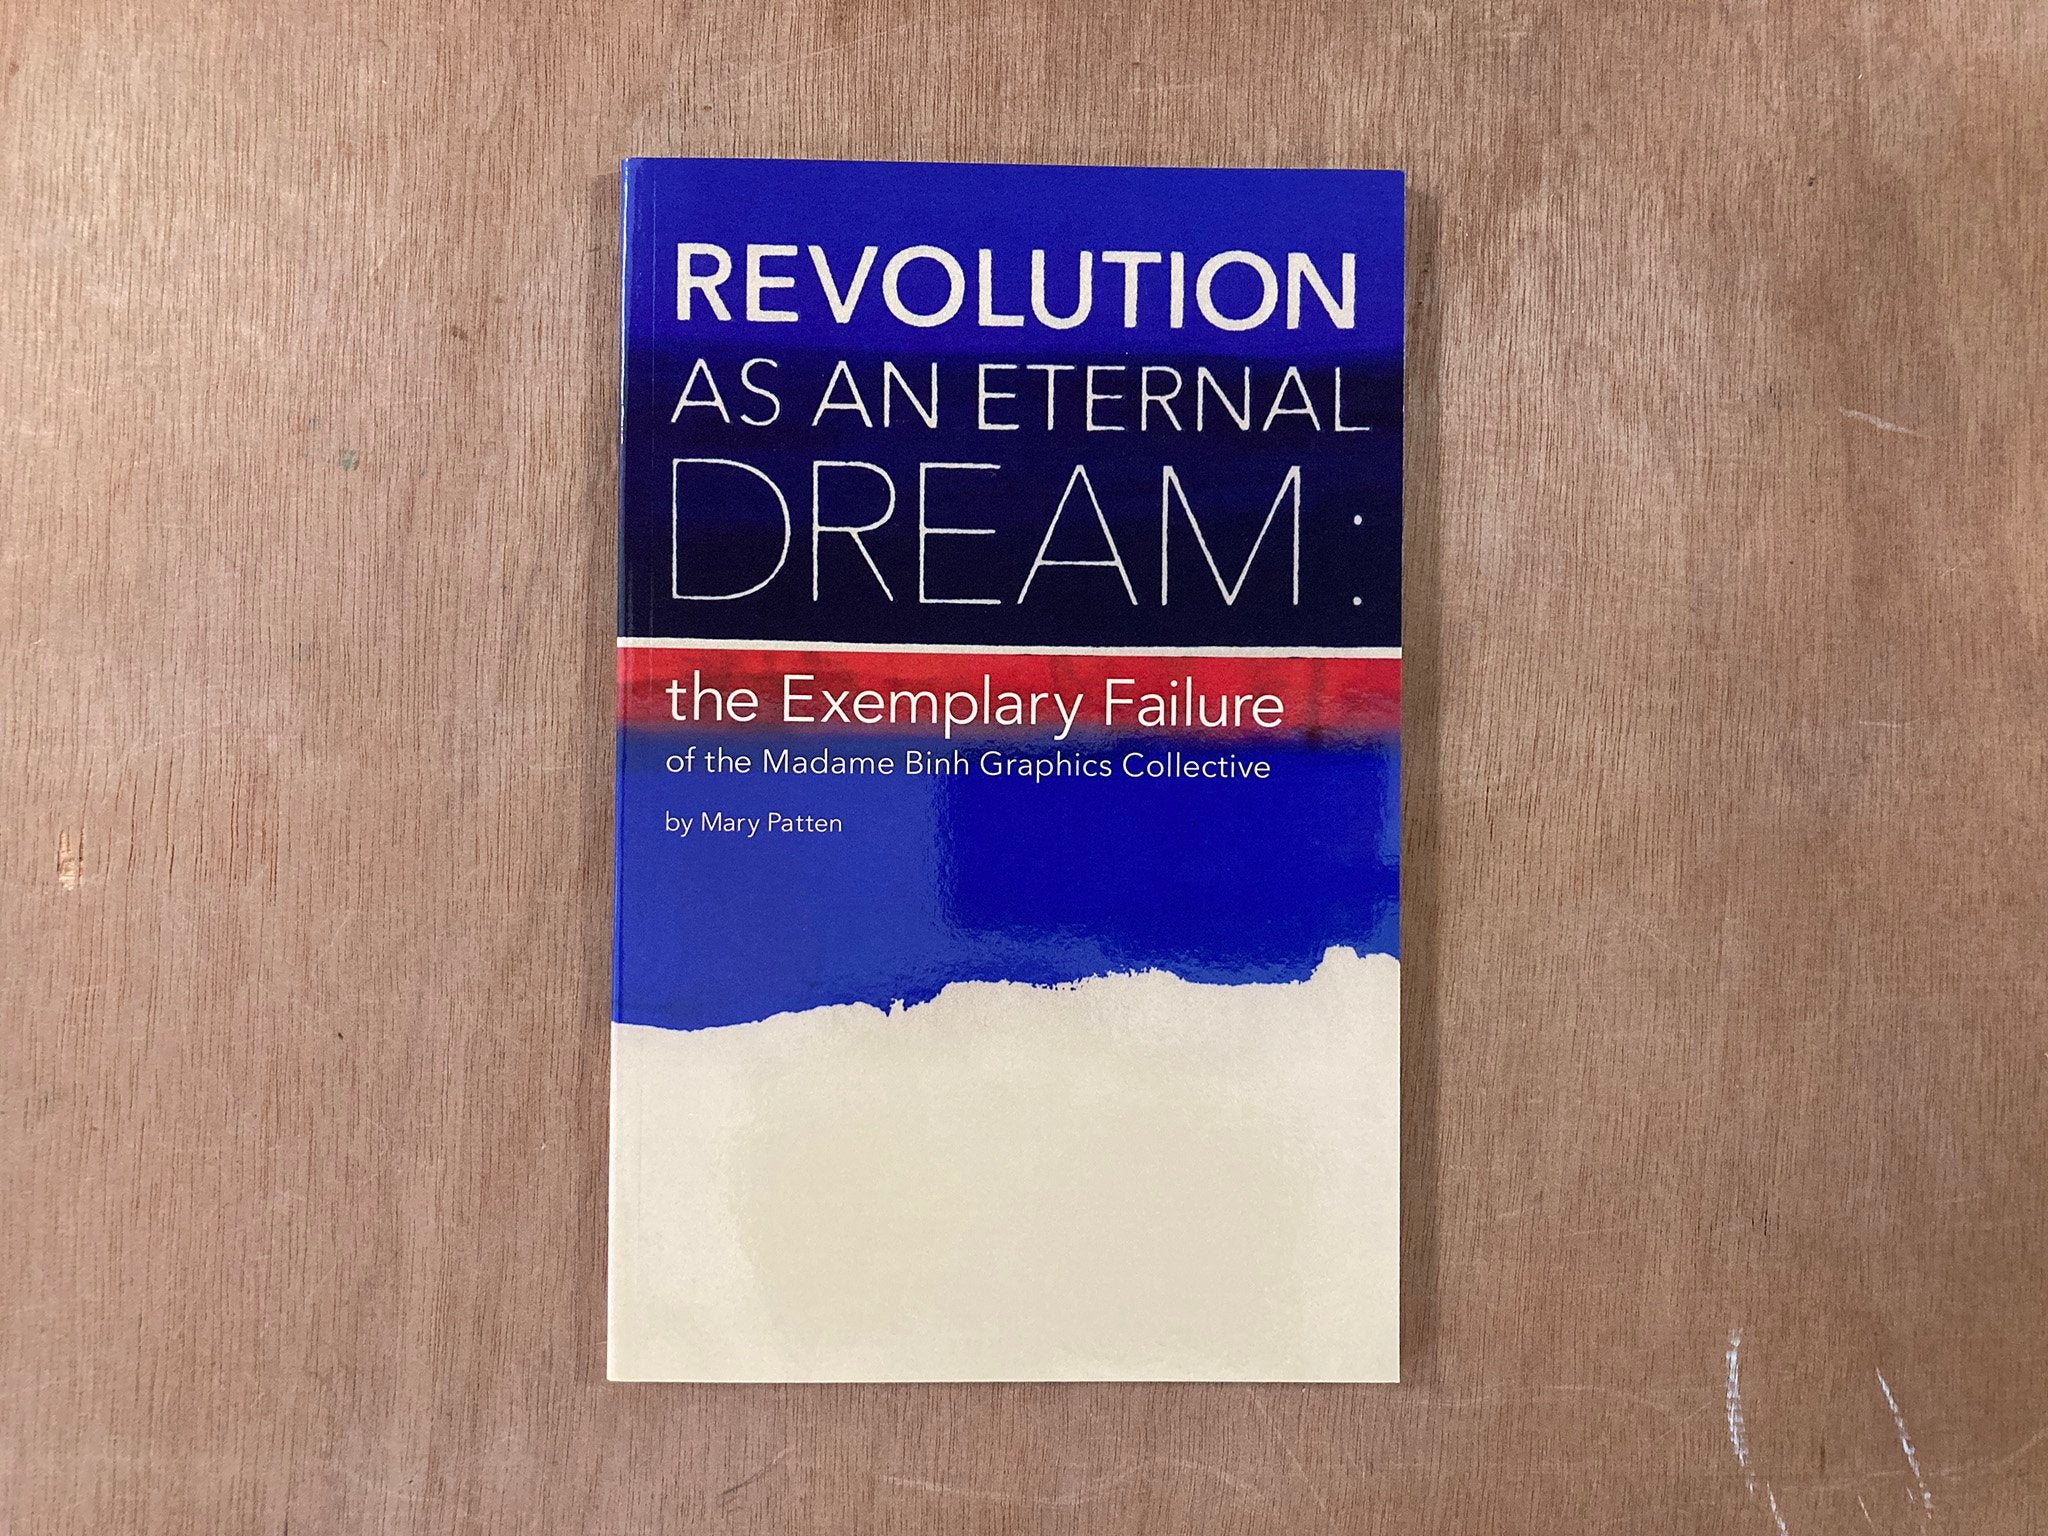 REVOLUTION AS AN ETERNAL DREAM: THE EXEMPLARY FAILURE OF THE MADAME BINH GRAPHICS COLLECTIVE by Mary Patten